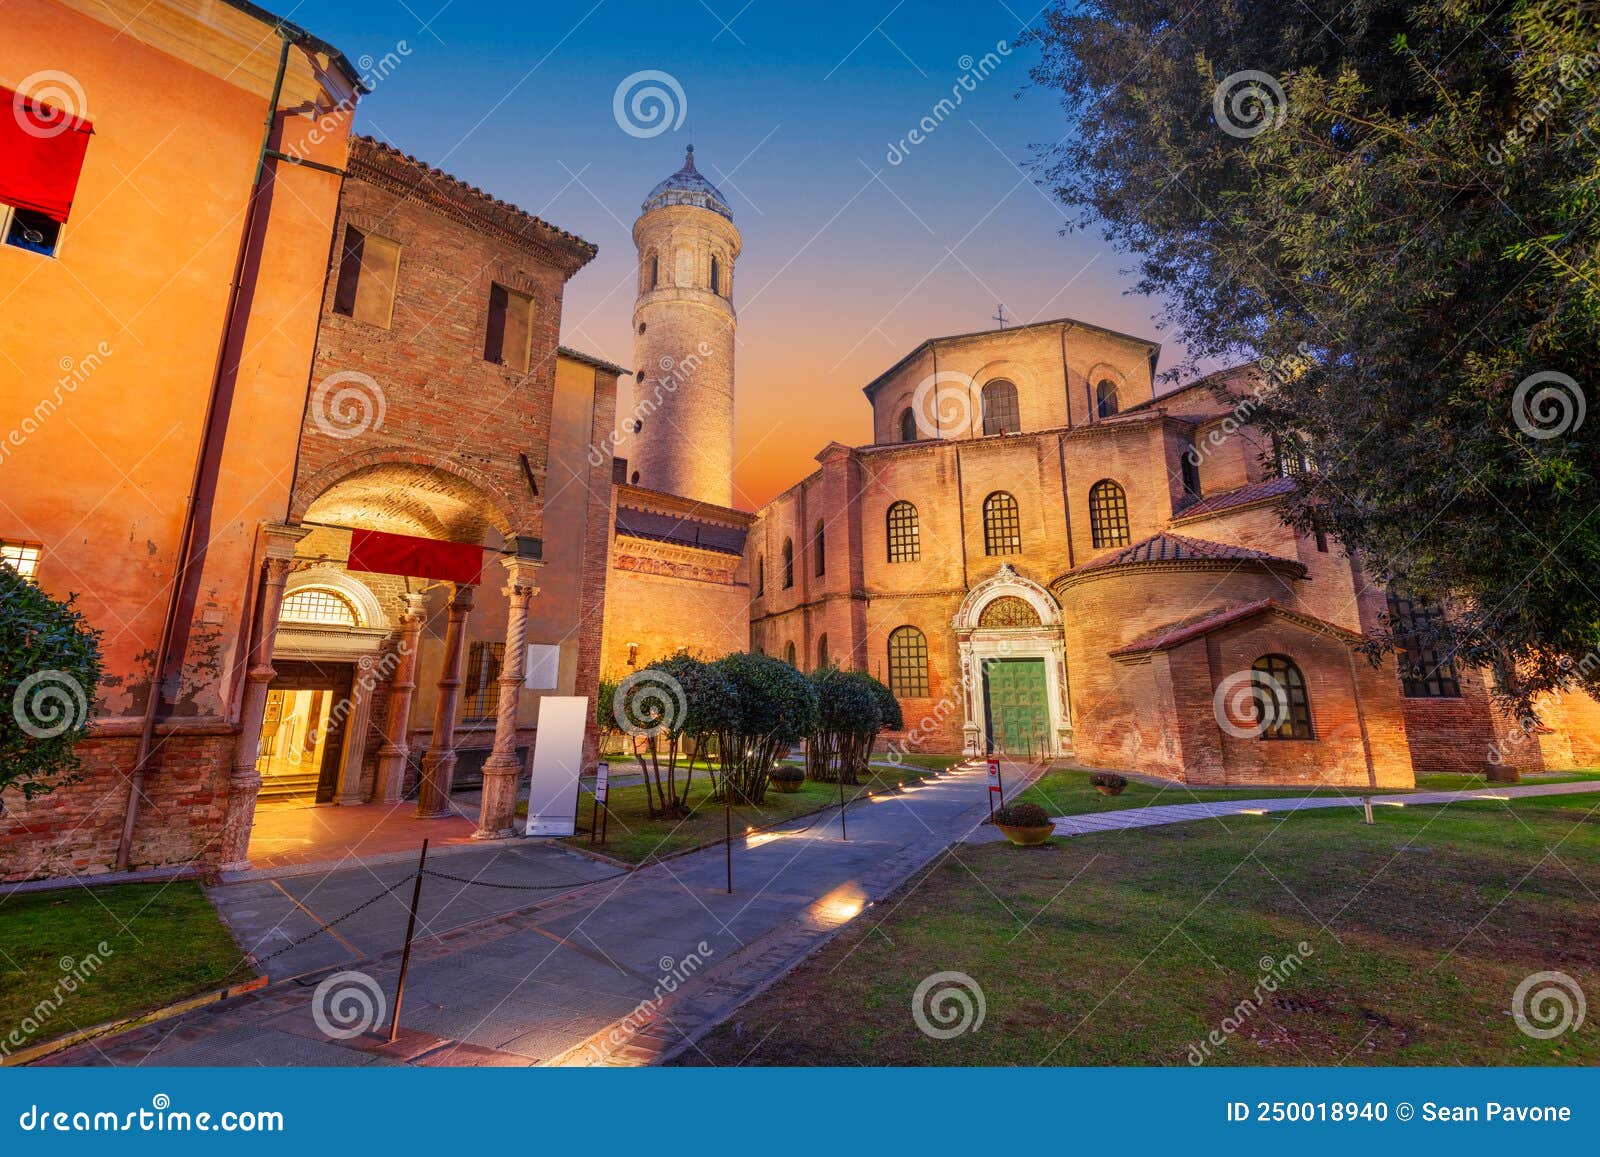 ravenna, italy at basilica of san vitale in the evening